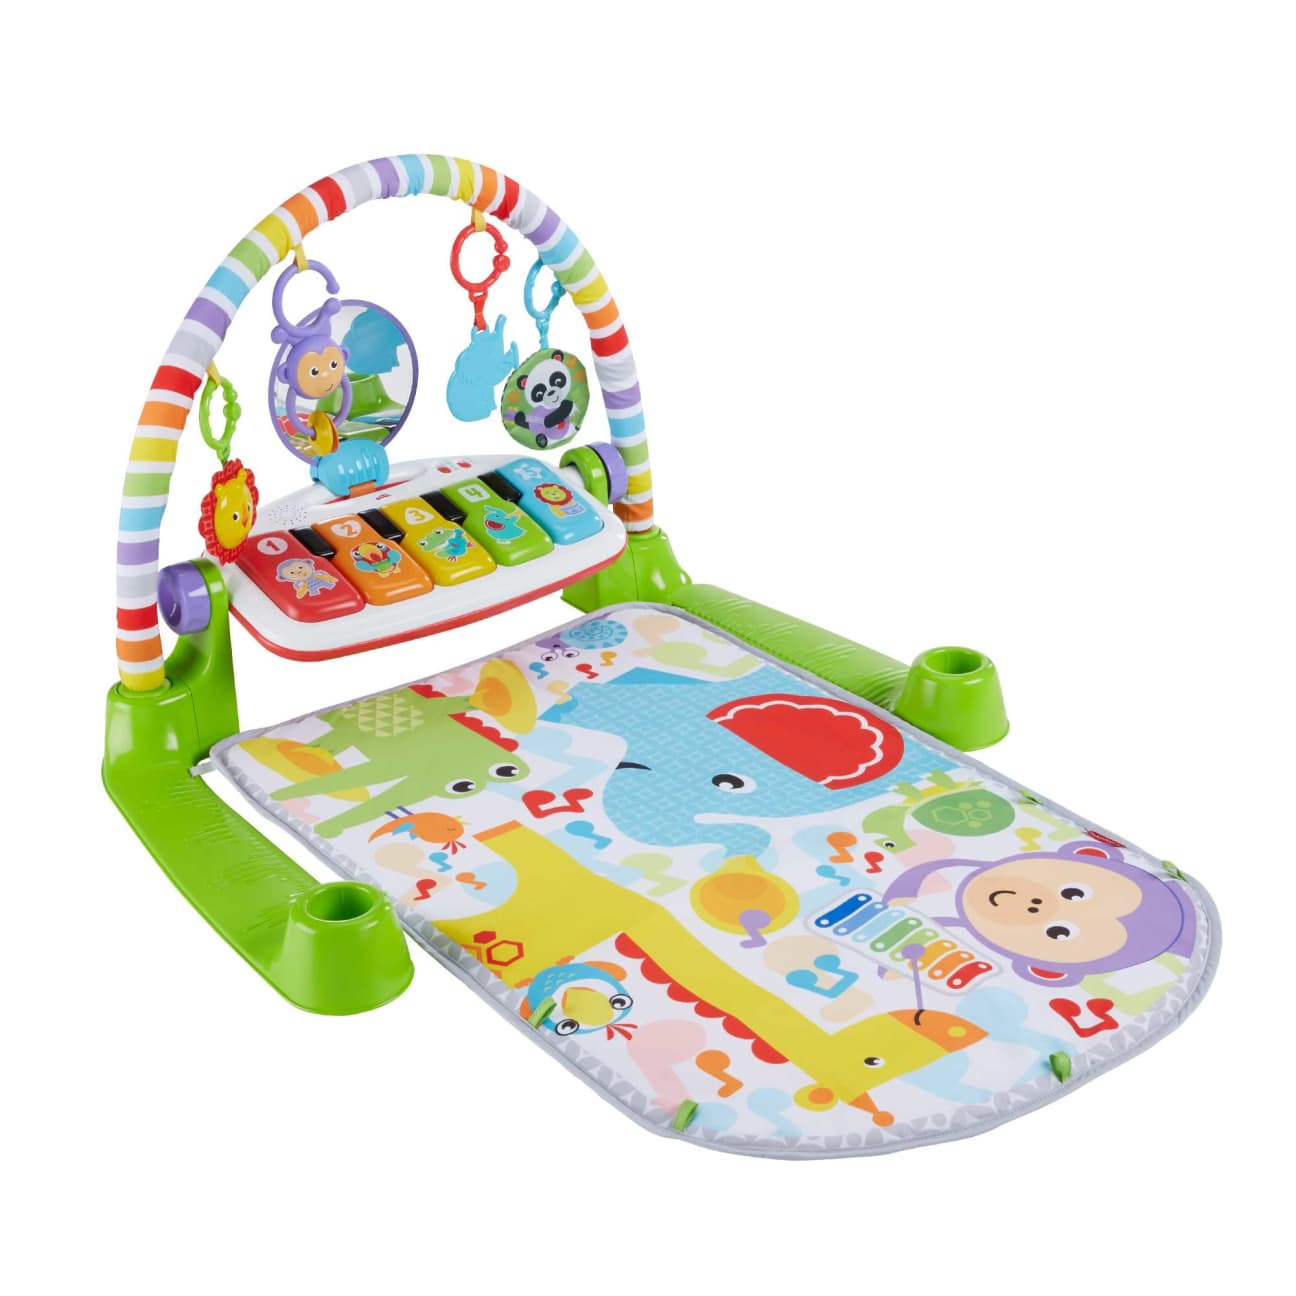 Fisher-Price Deluxe Kick ‘n Play Piano Gym